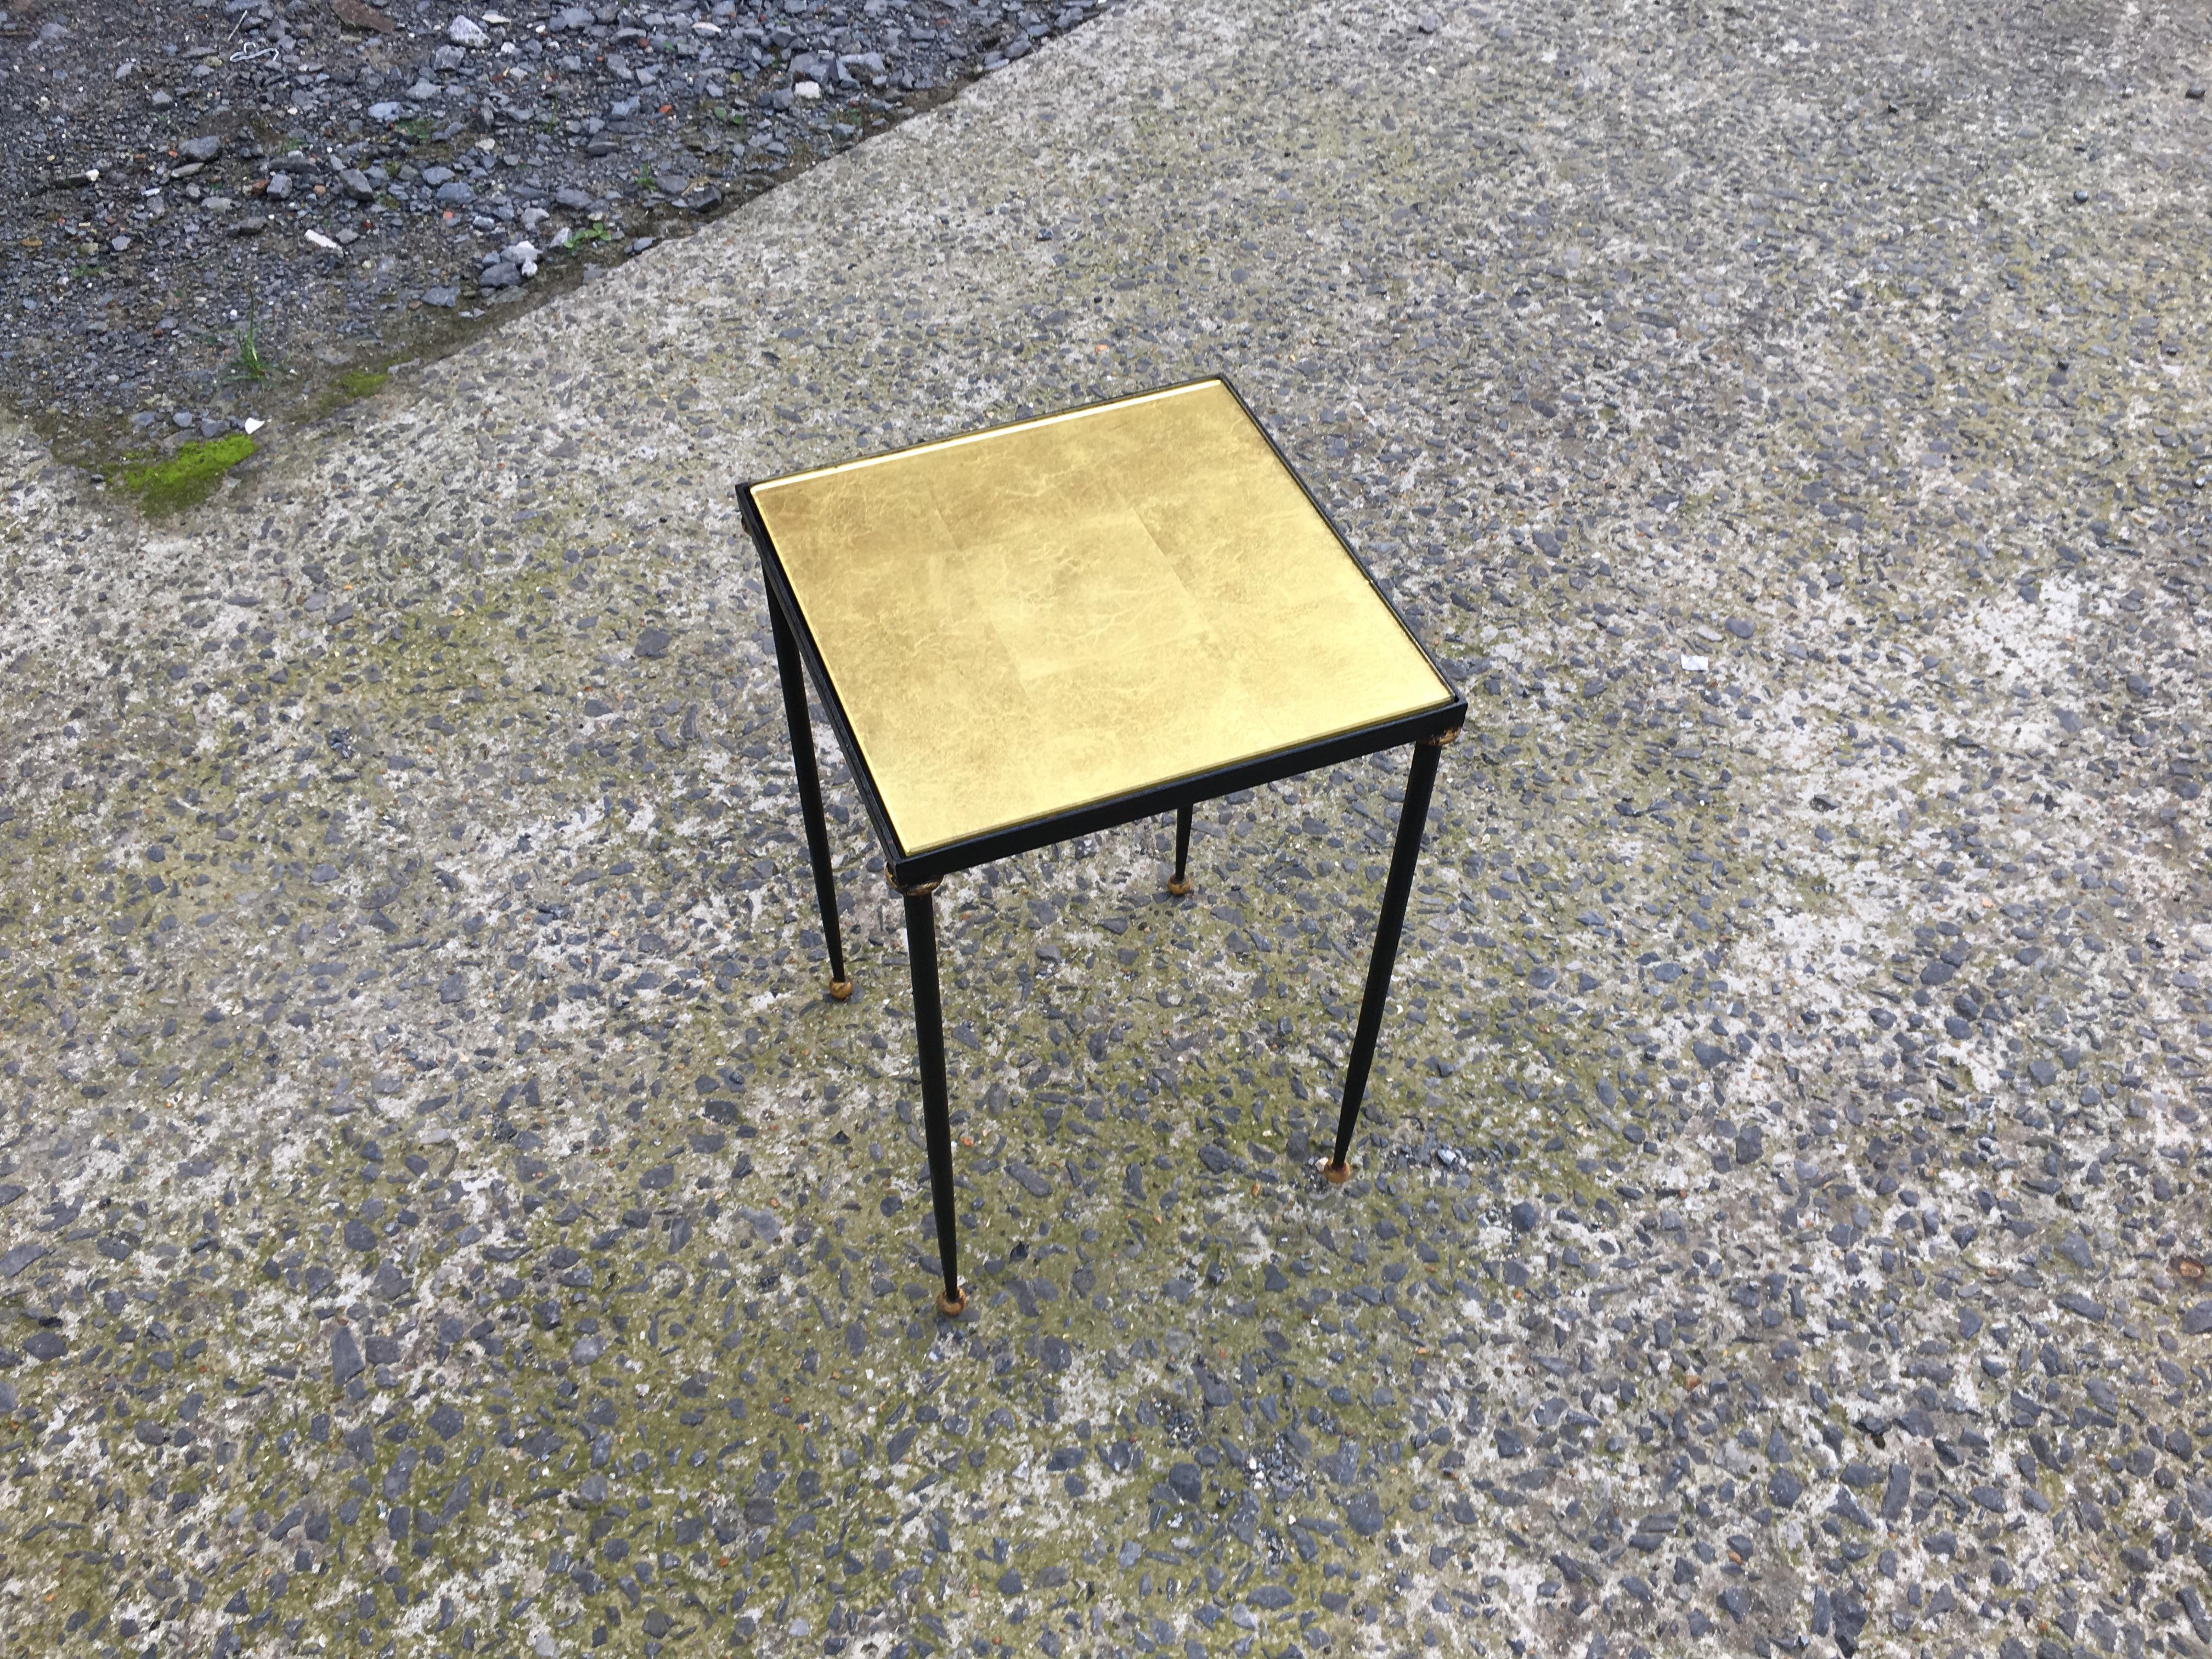 René Prou, elegant side table in lacquered and gilded metal, tray made of gold leaf under glass, circa 1940.